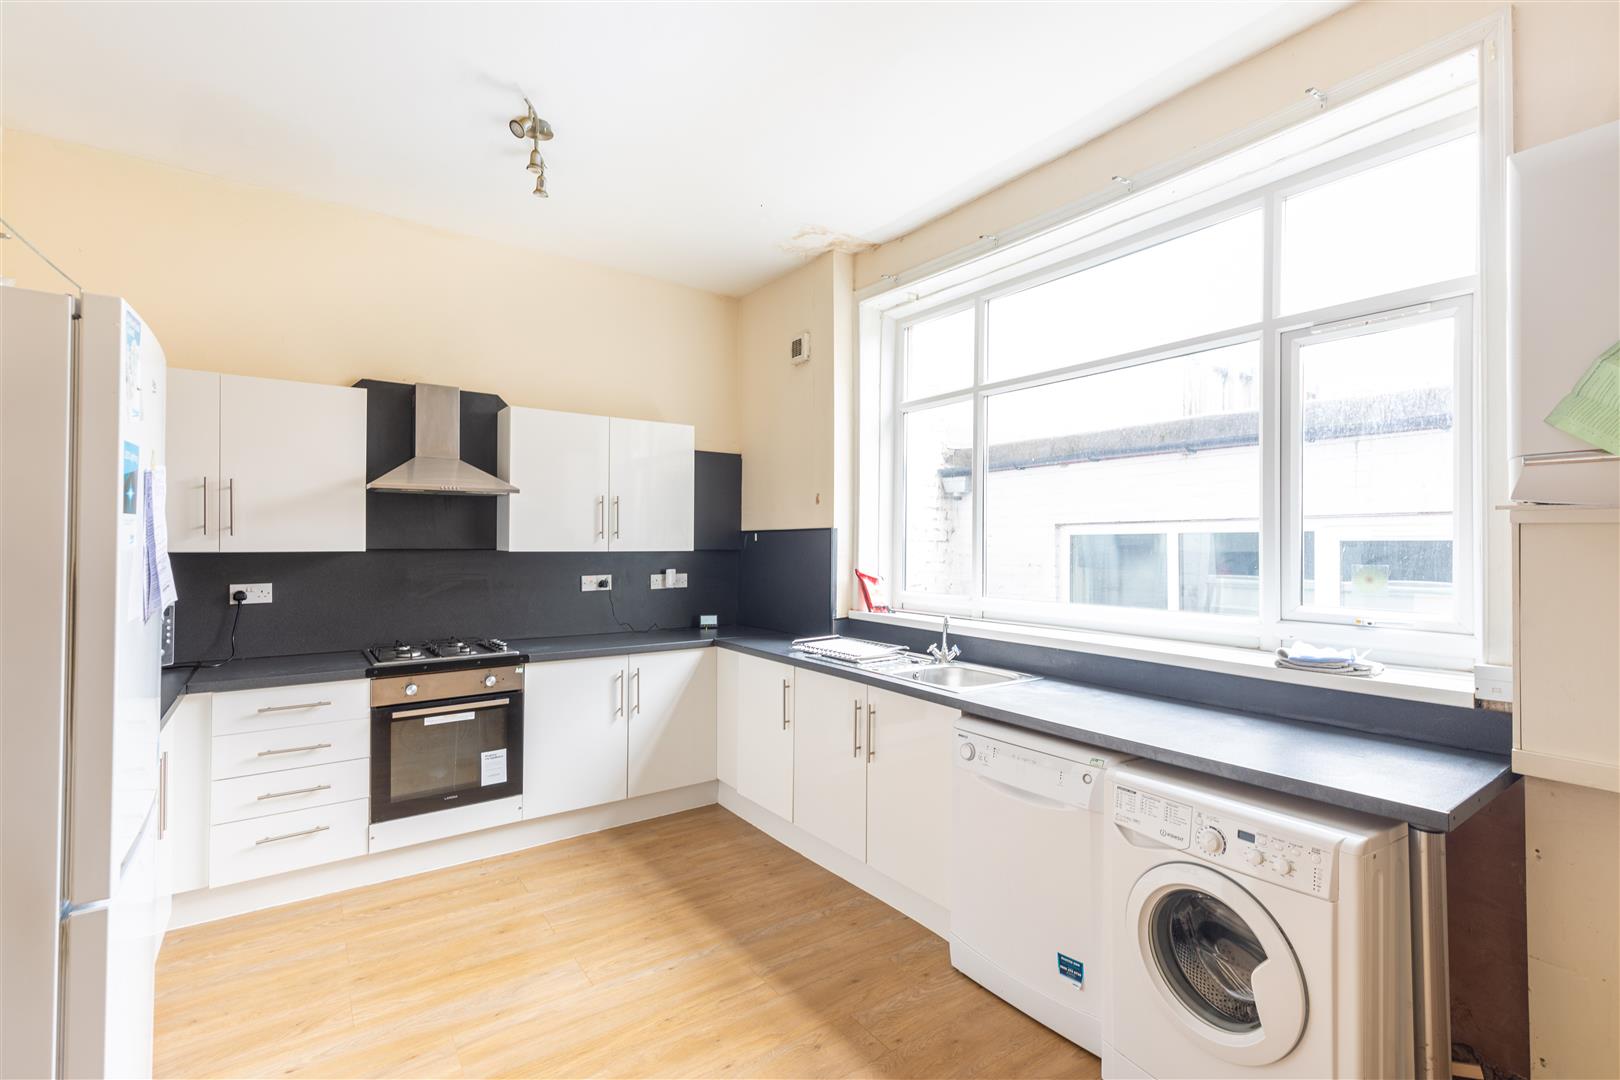 5 bed terraced house to rent in Chillingham Road, Heaton - Property Image 1